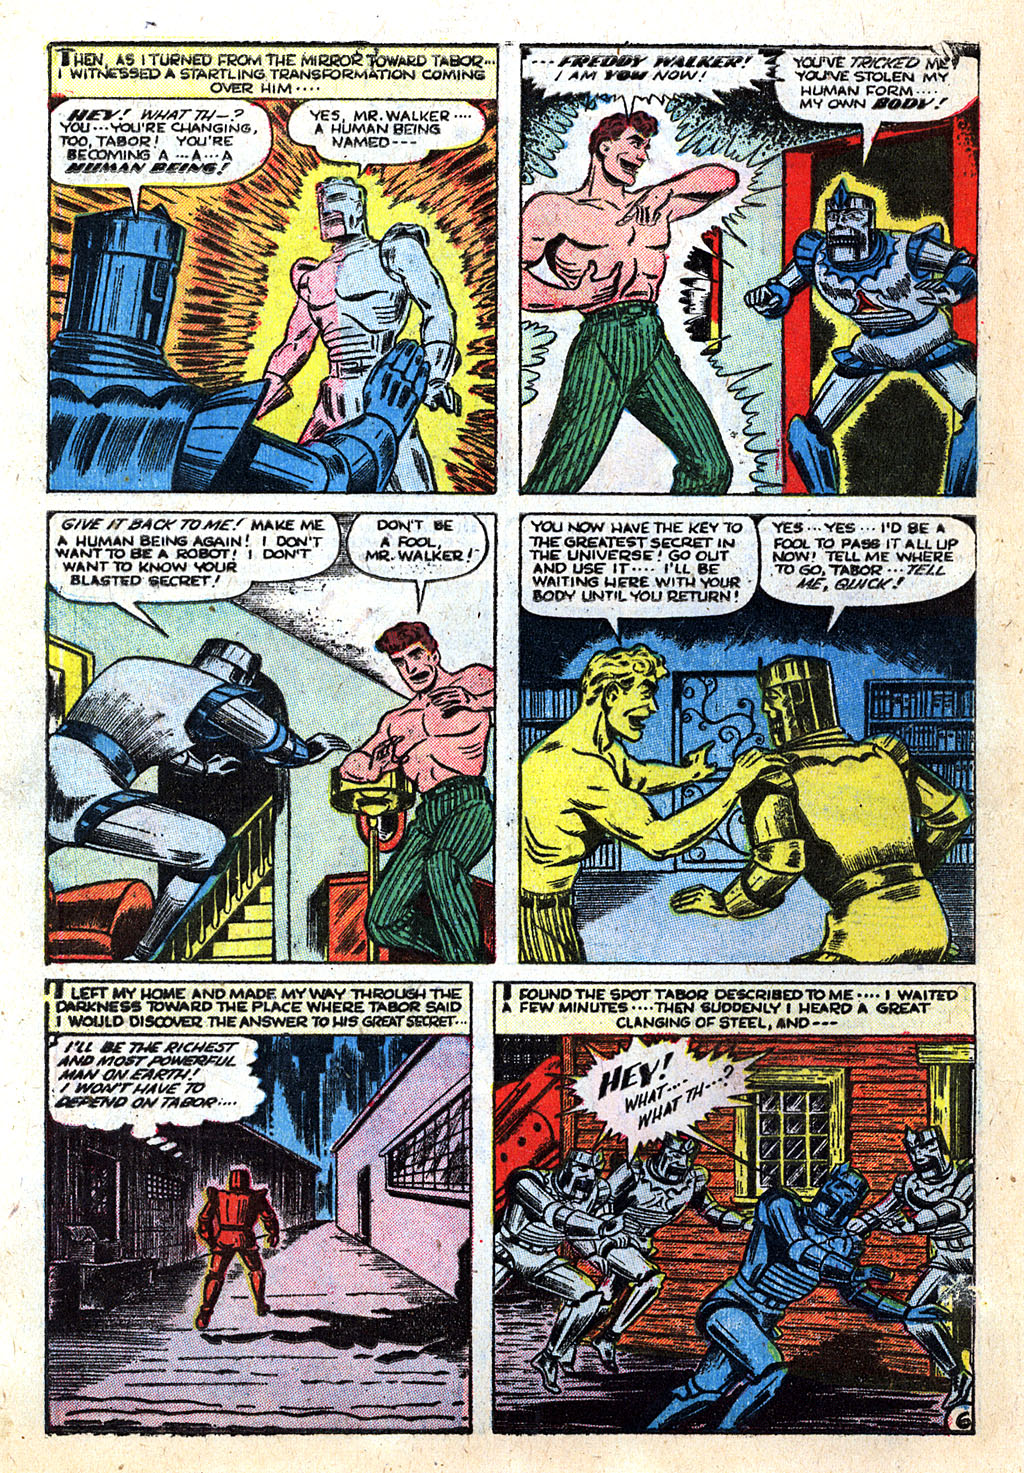 Marvel Tales (1949) 104 Page 7